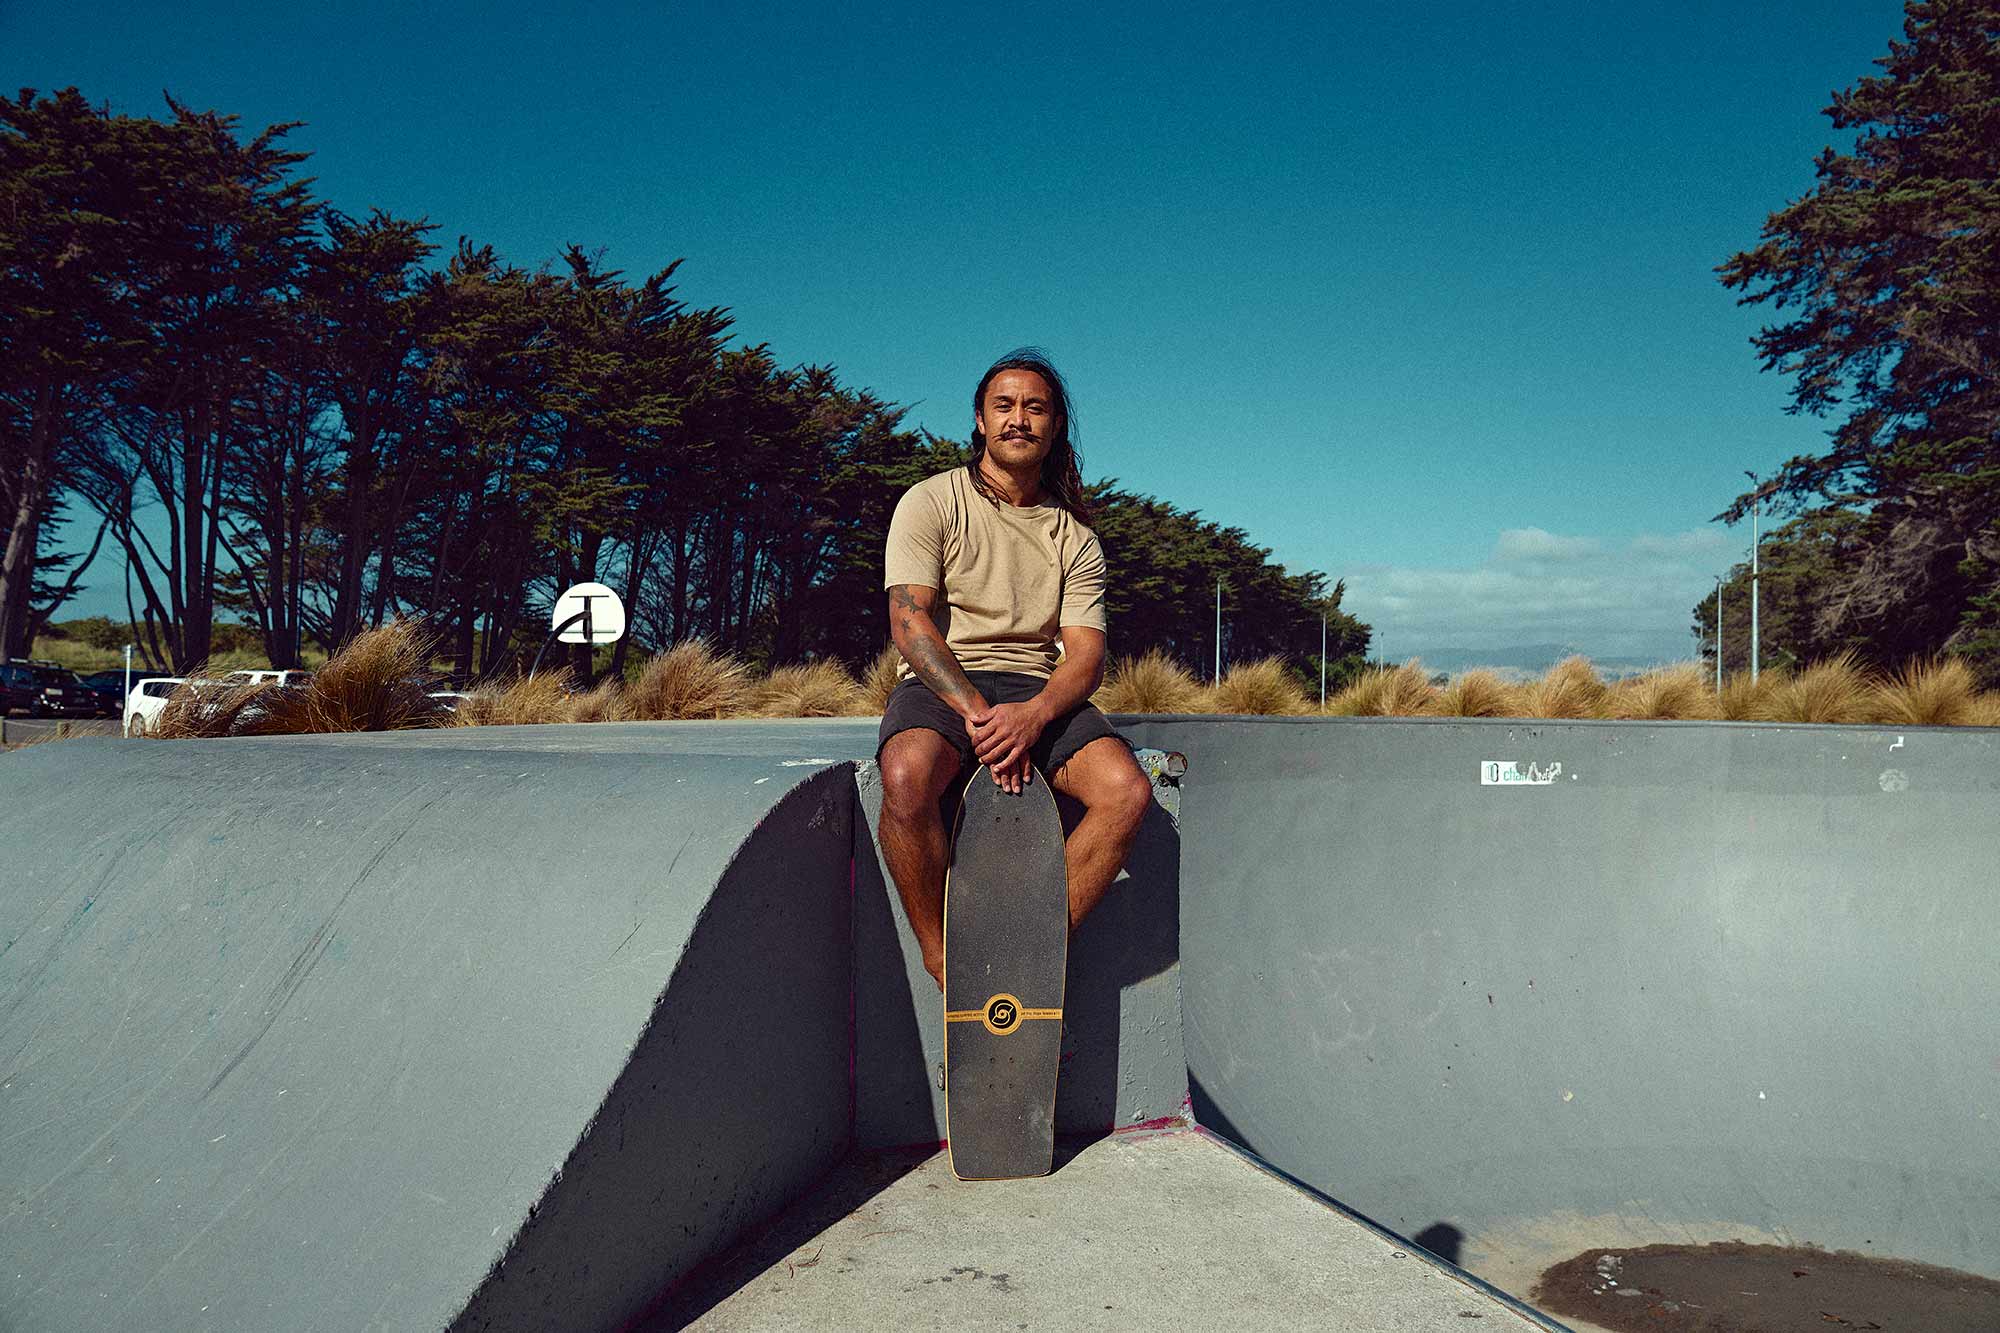 portrait imagery of local at new brighton beach side skatepark